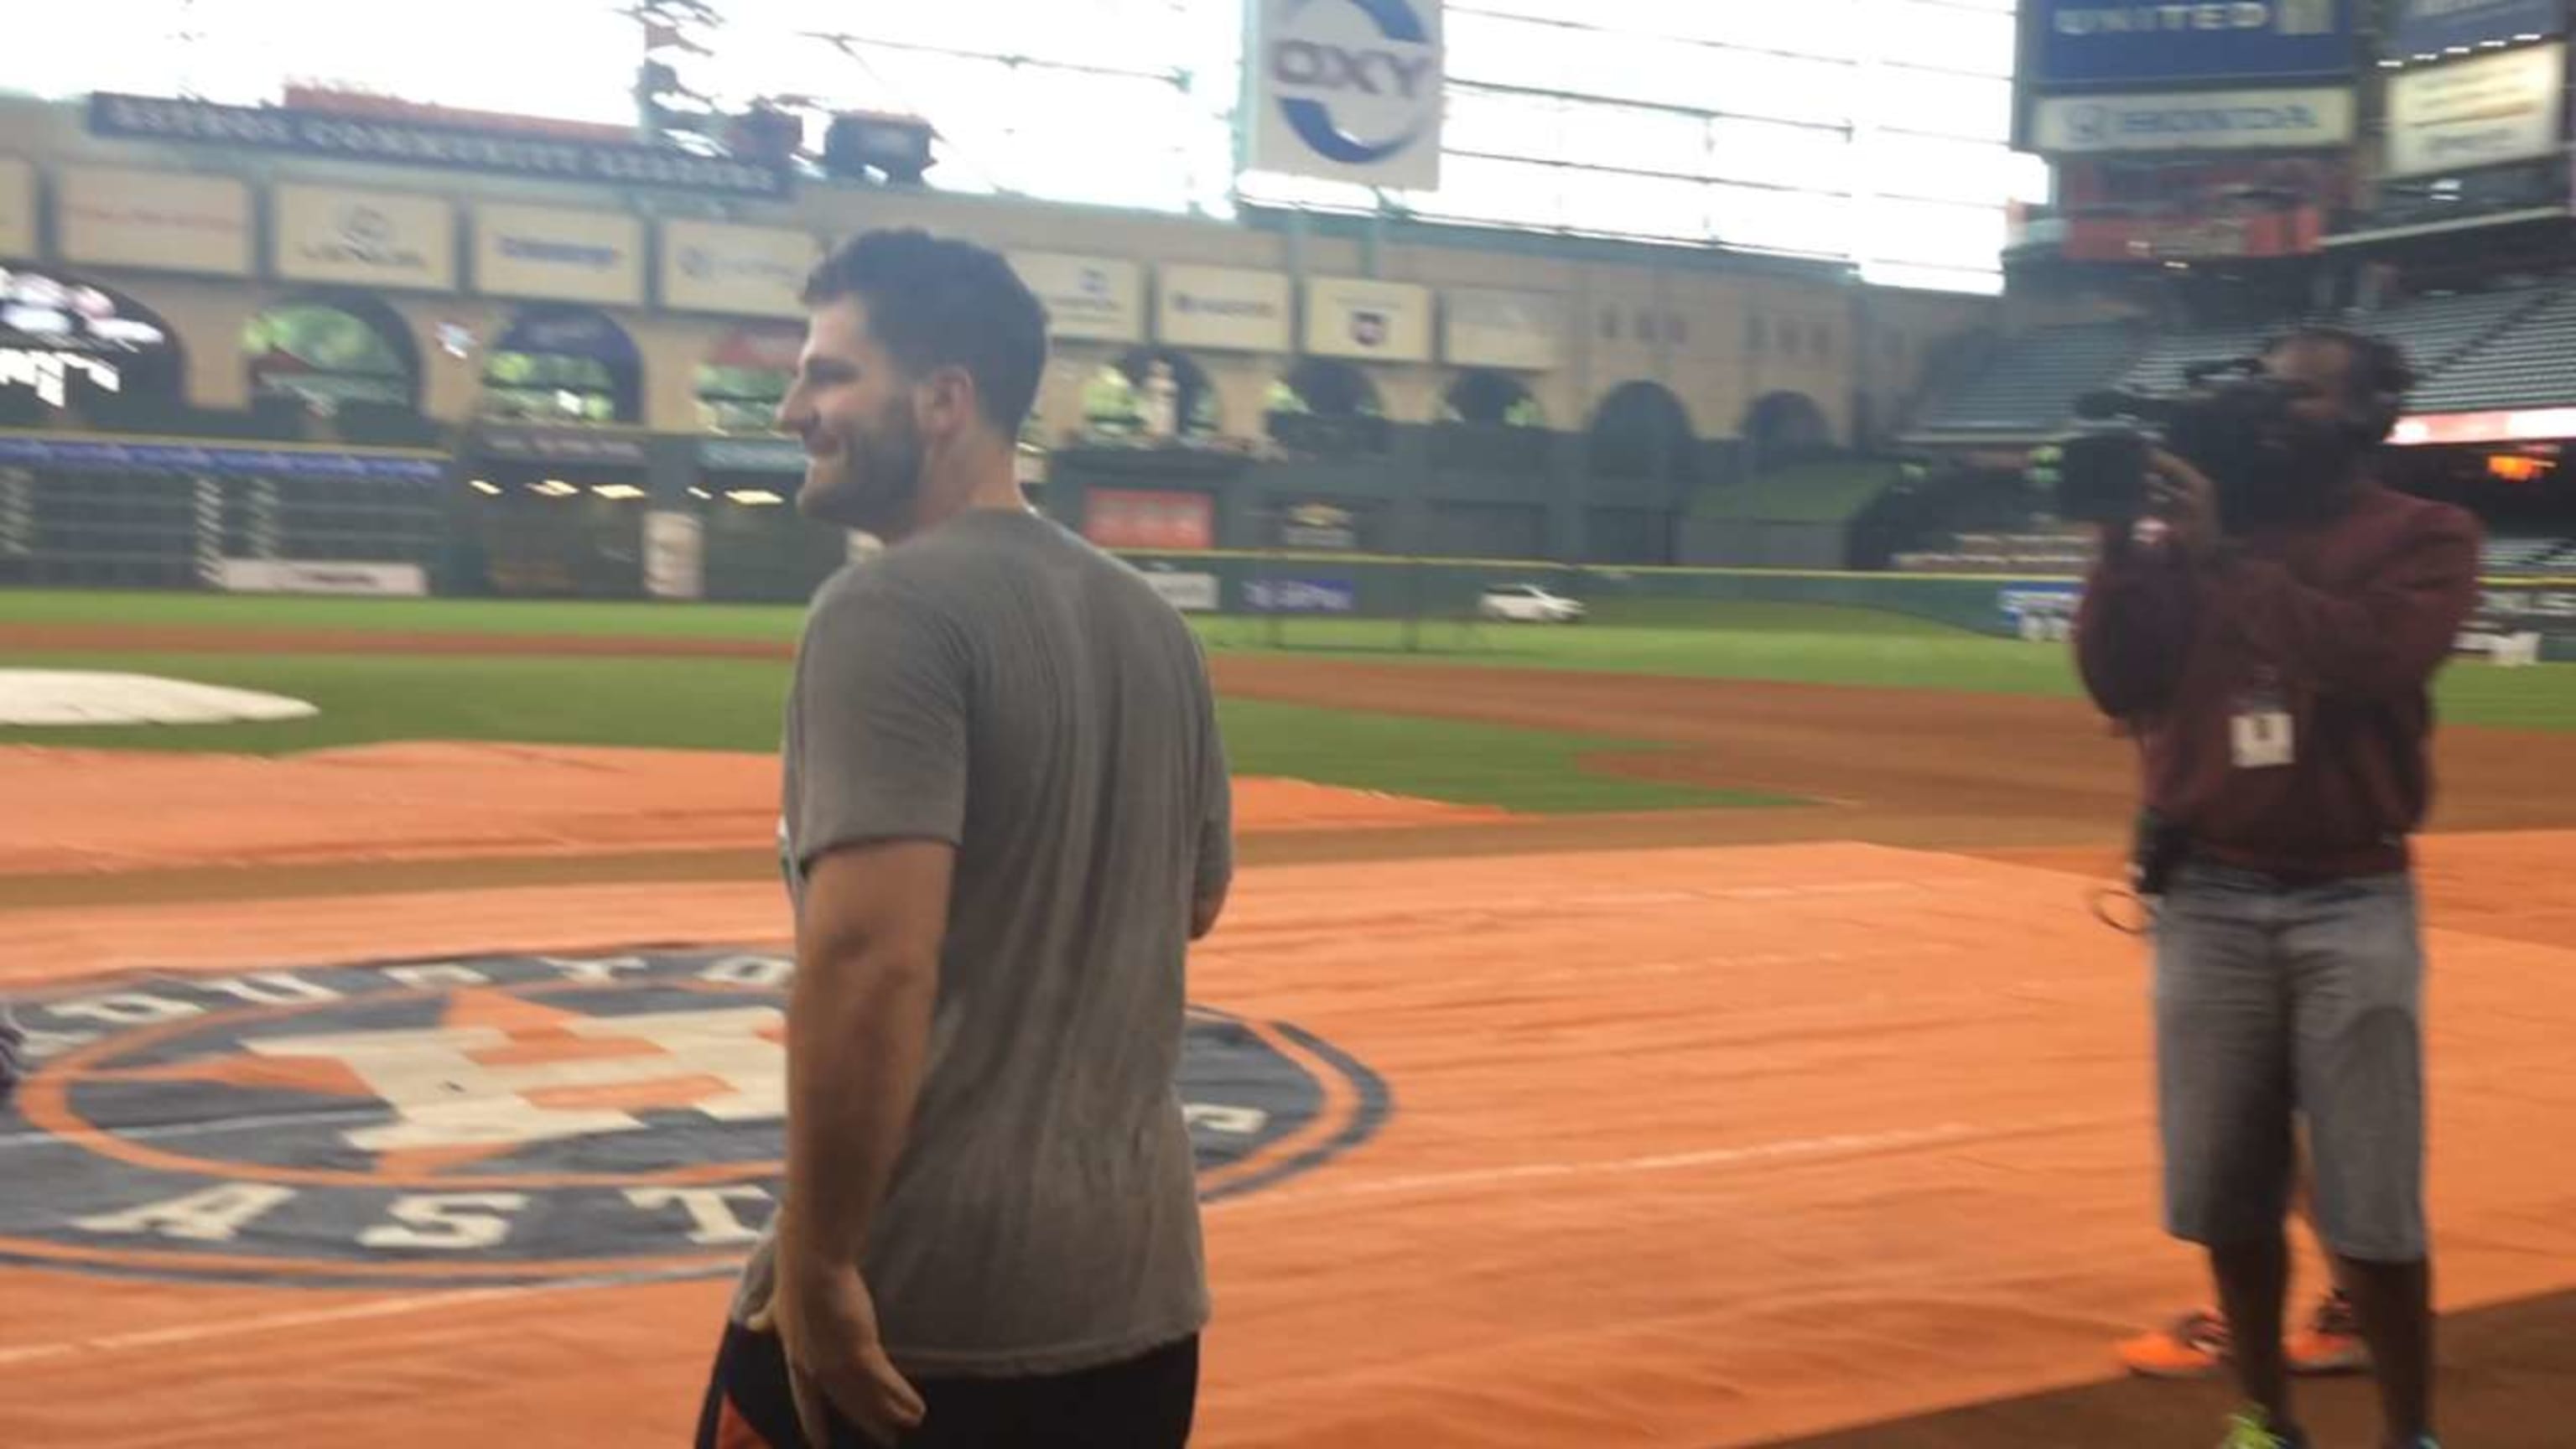 The Astros pranked Tyler White by parking his car in center field during  batting practice